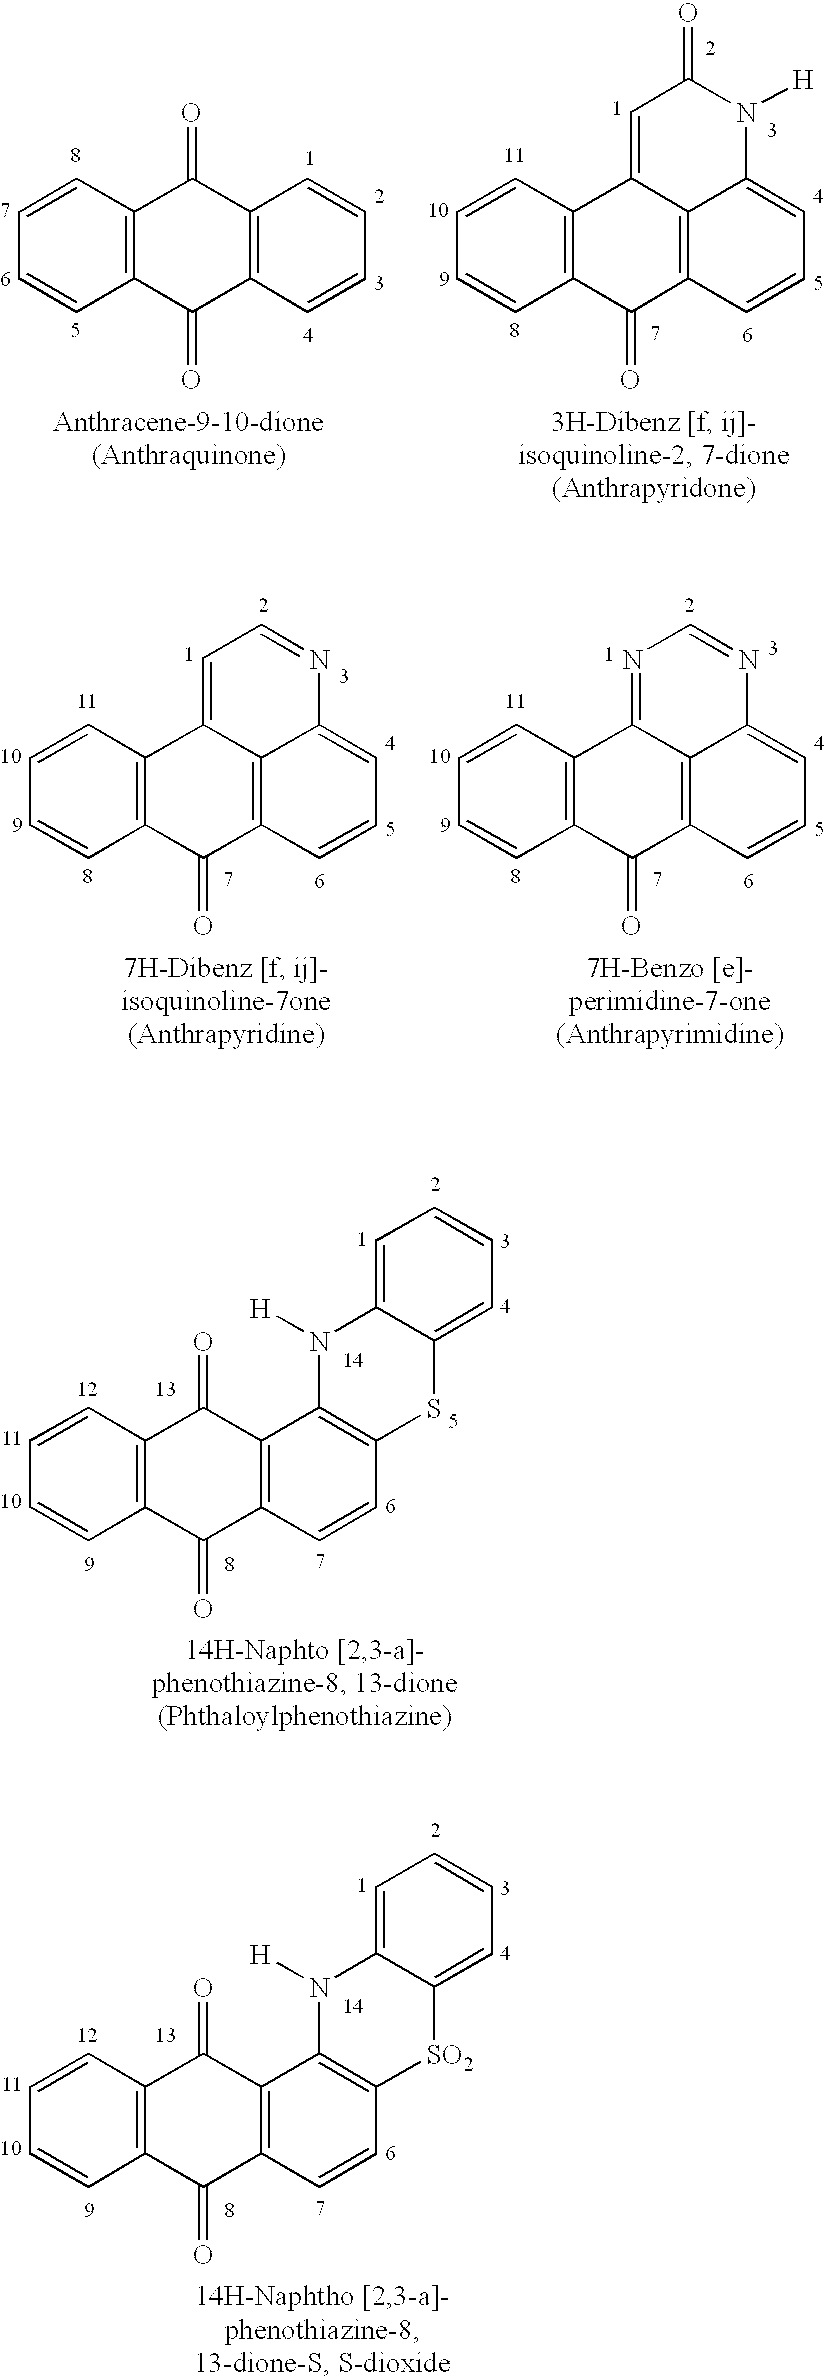 Anthraquinone and condensed anthraquinone colorants having sulfonamido linked poly (oxyalkylene) moieties and their preparation